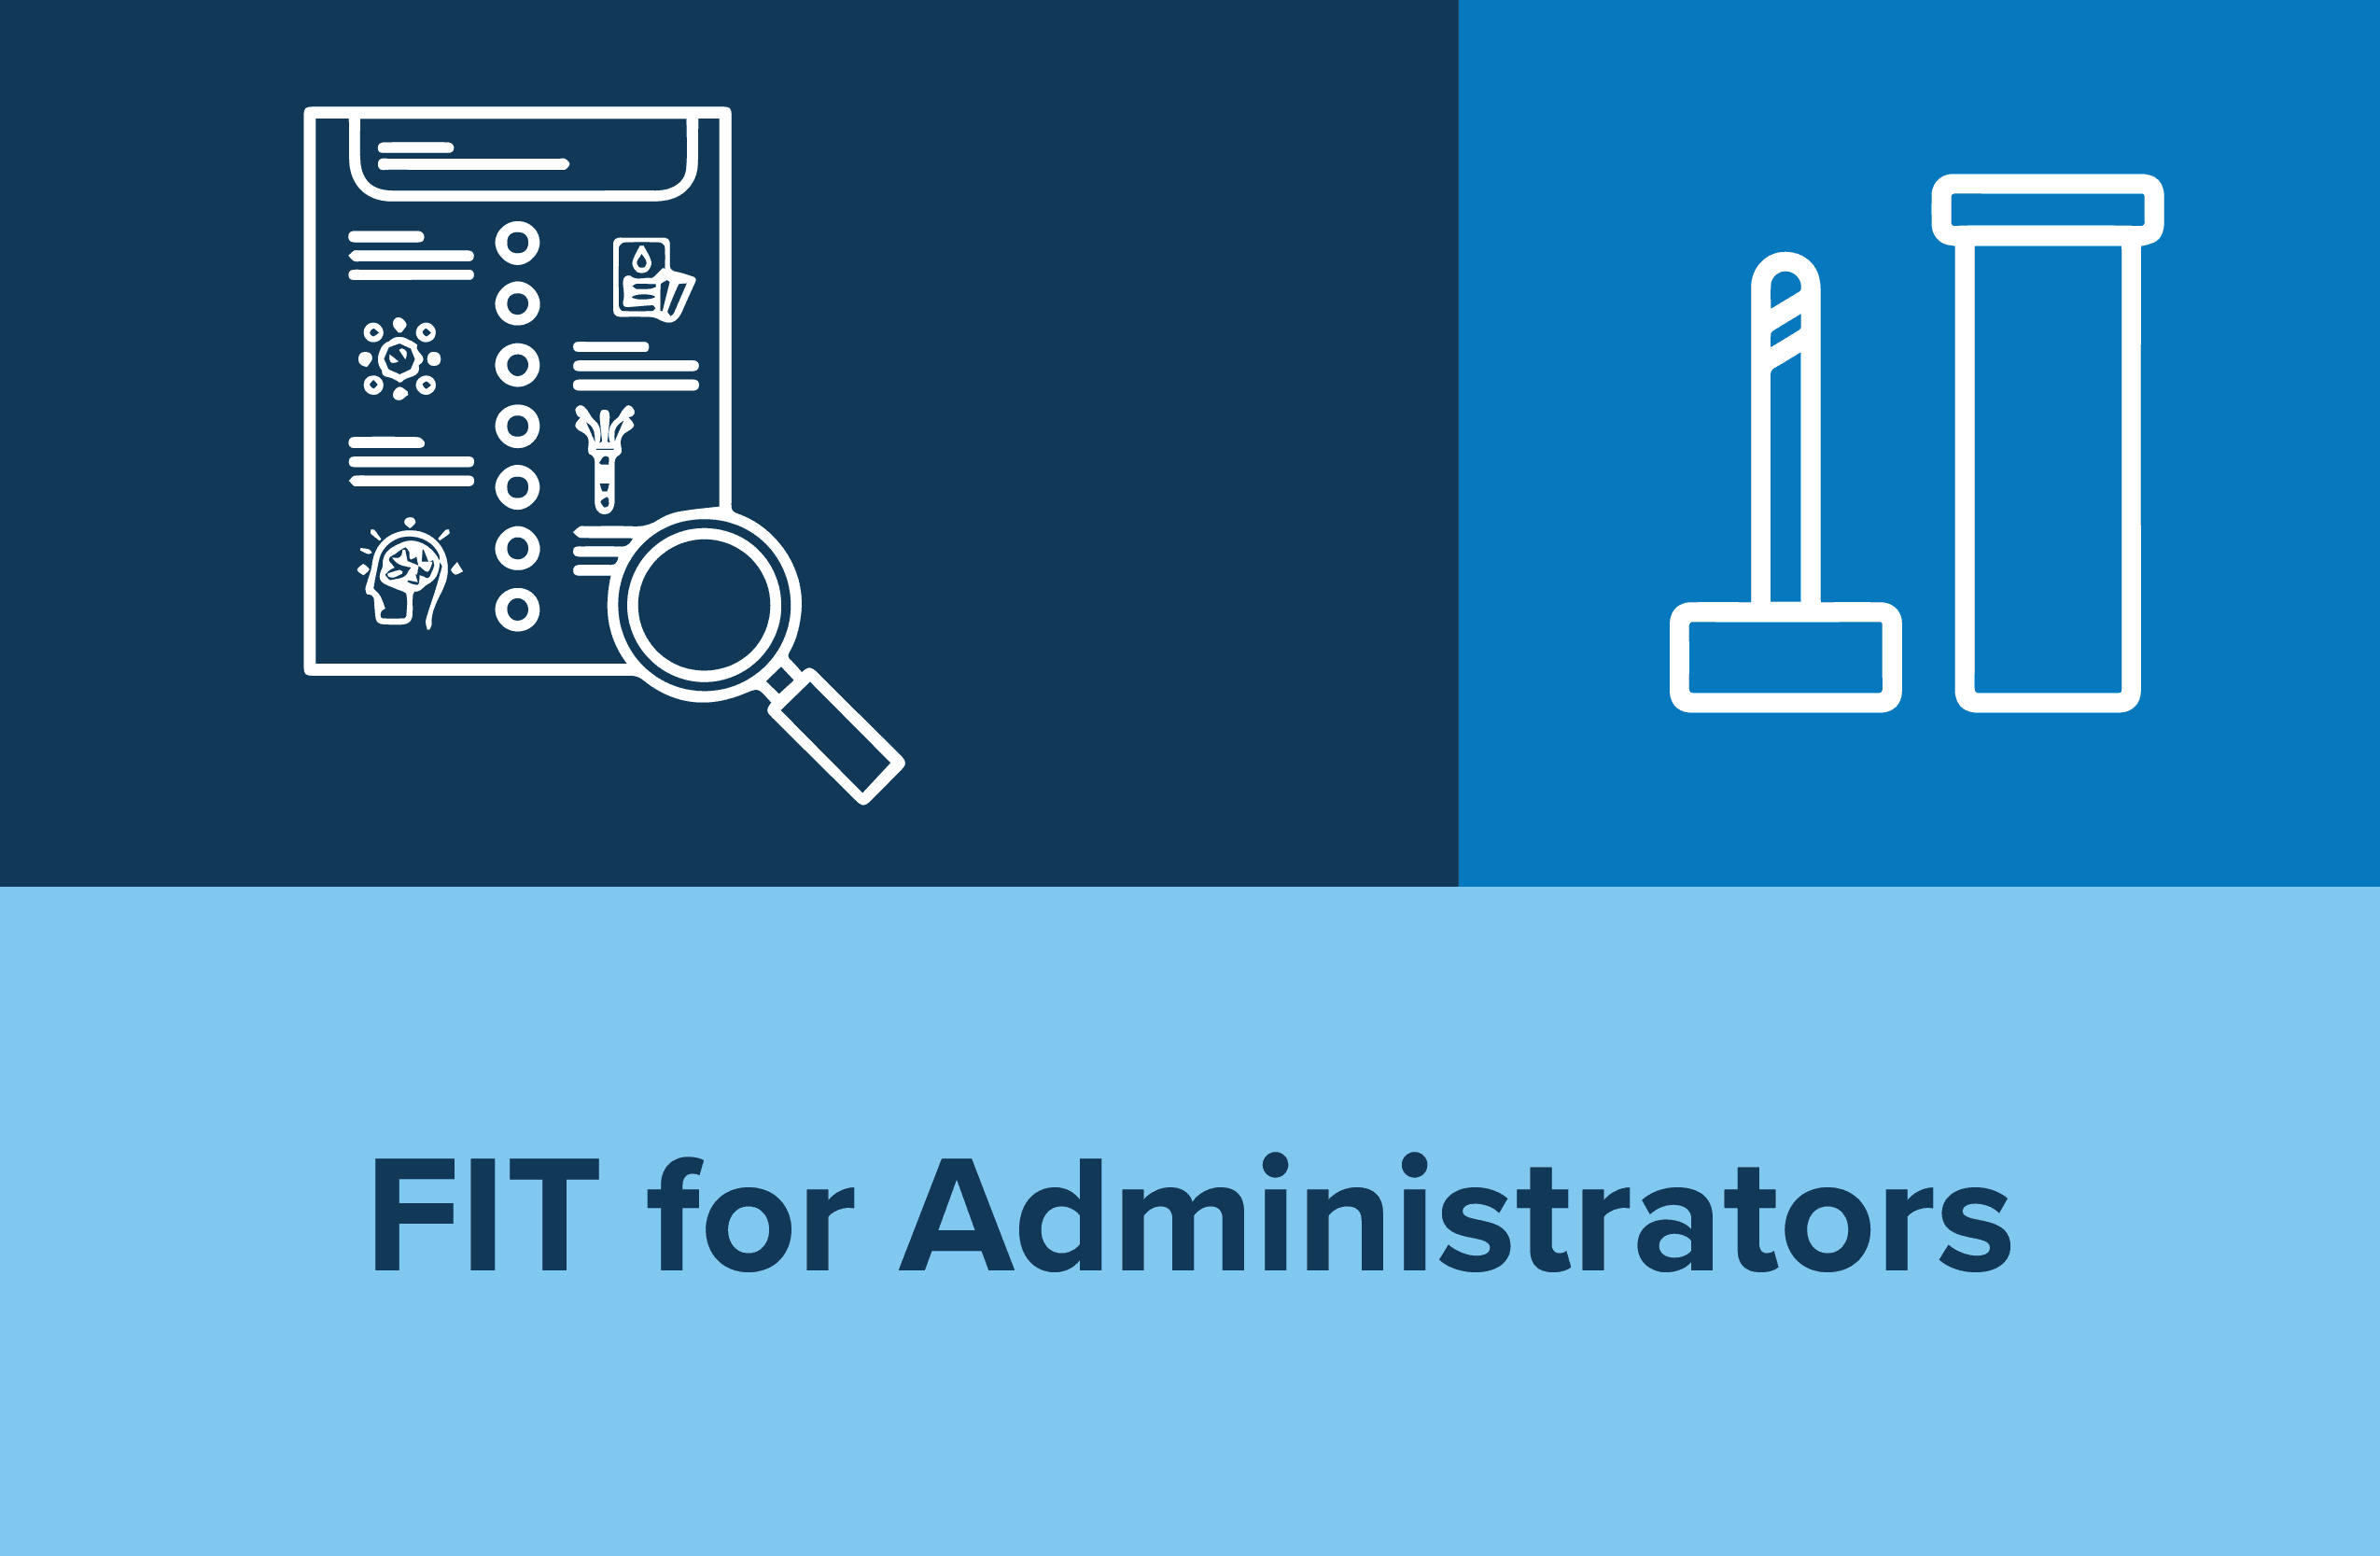 FIT for Administrators